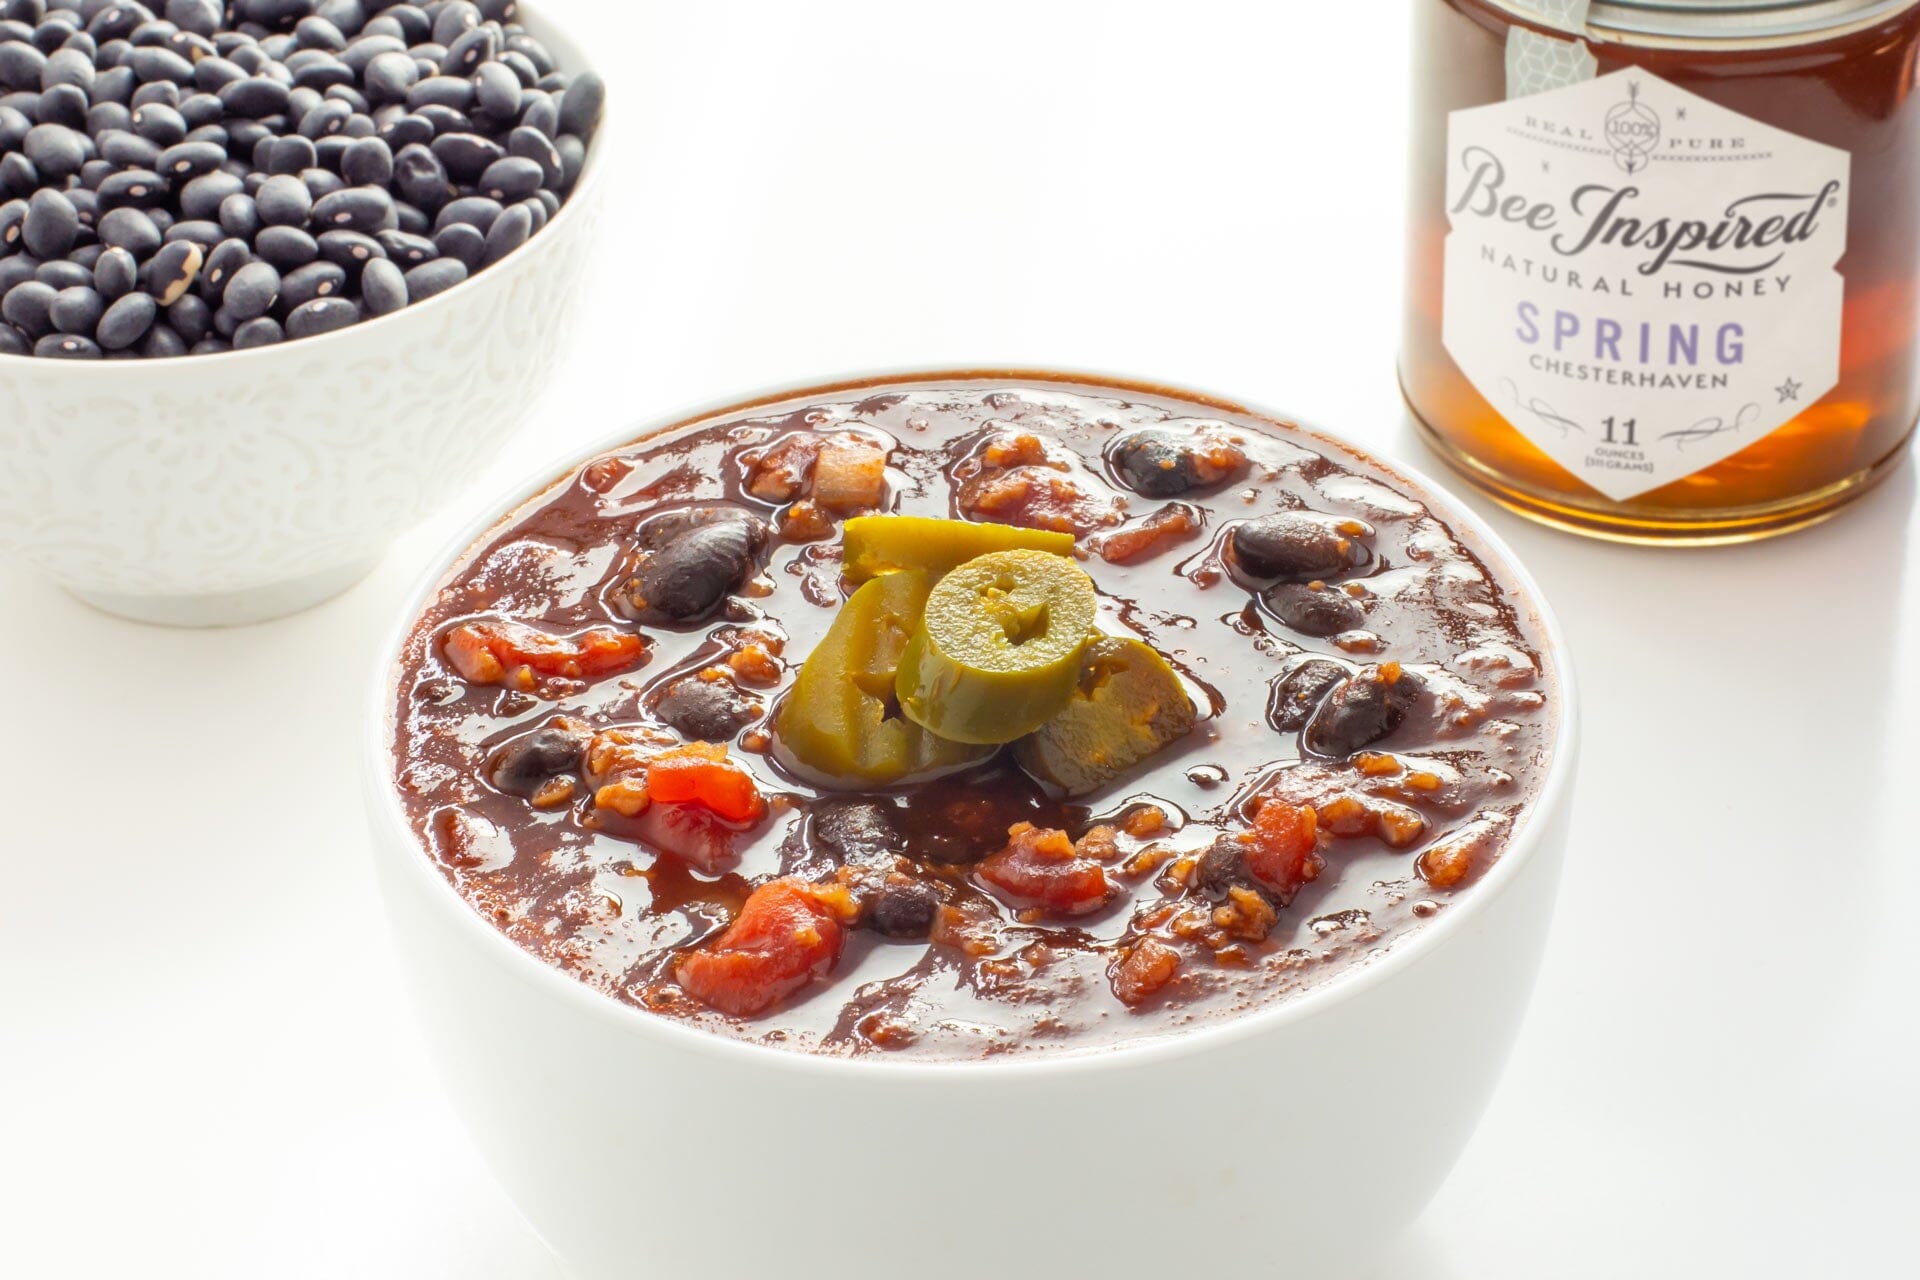 Sweet and Spicy Chili with Beer